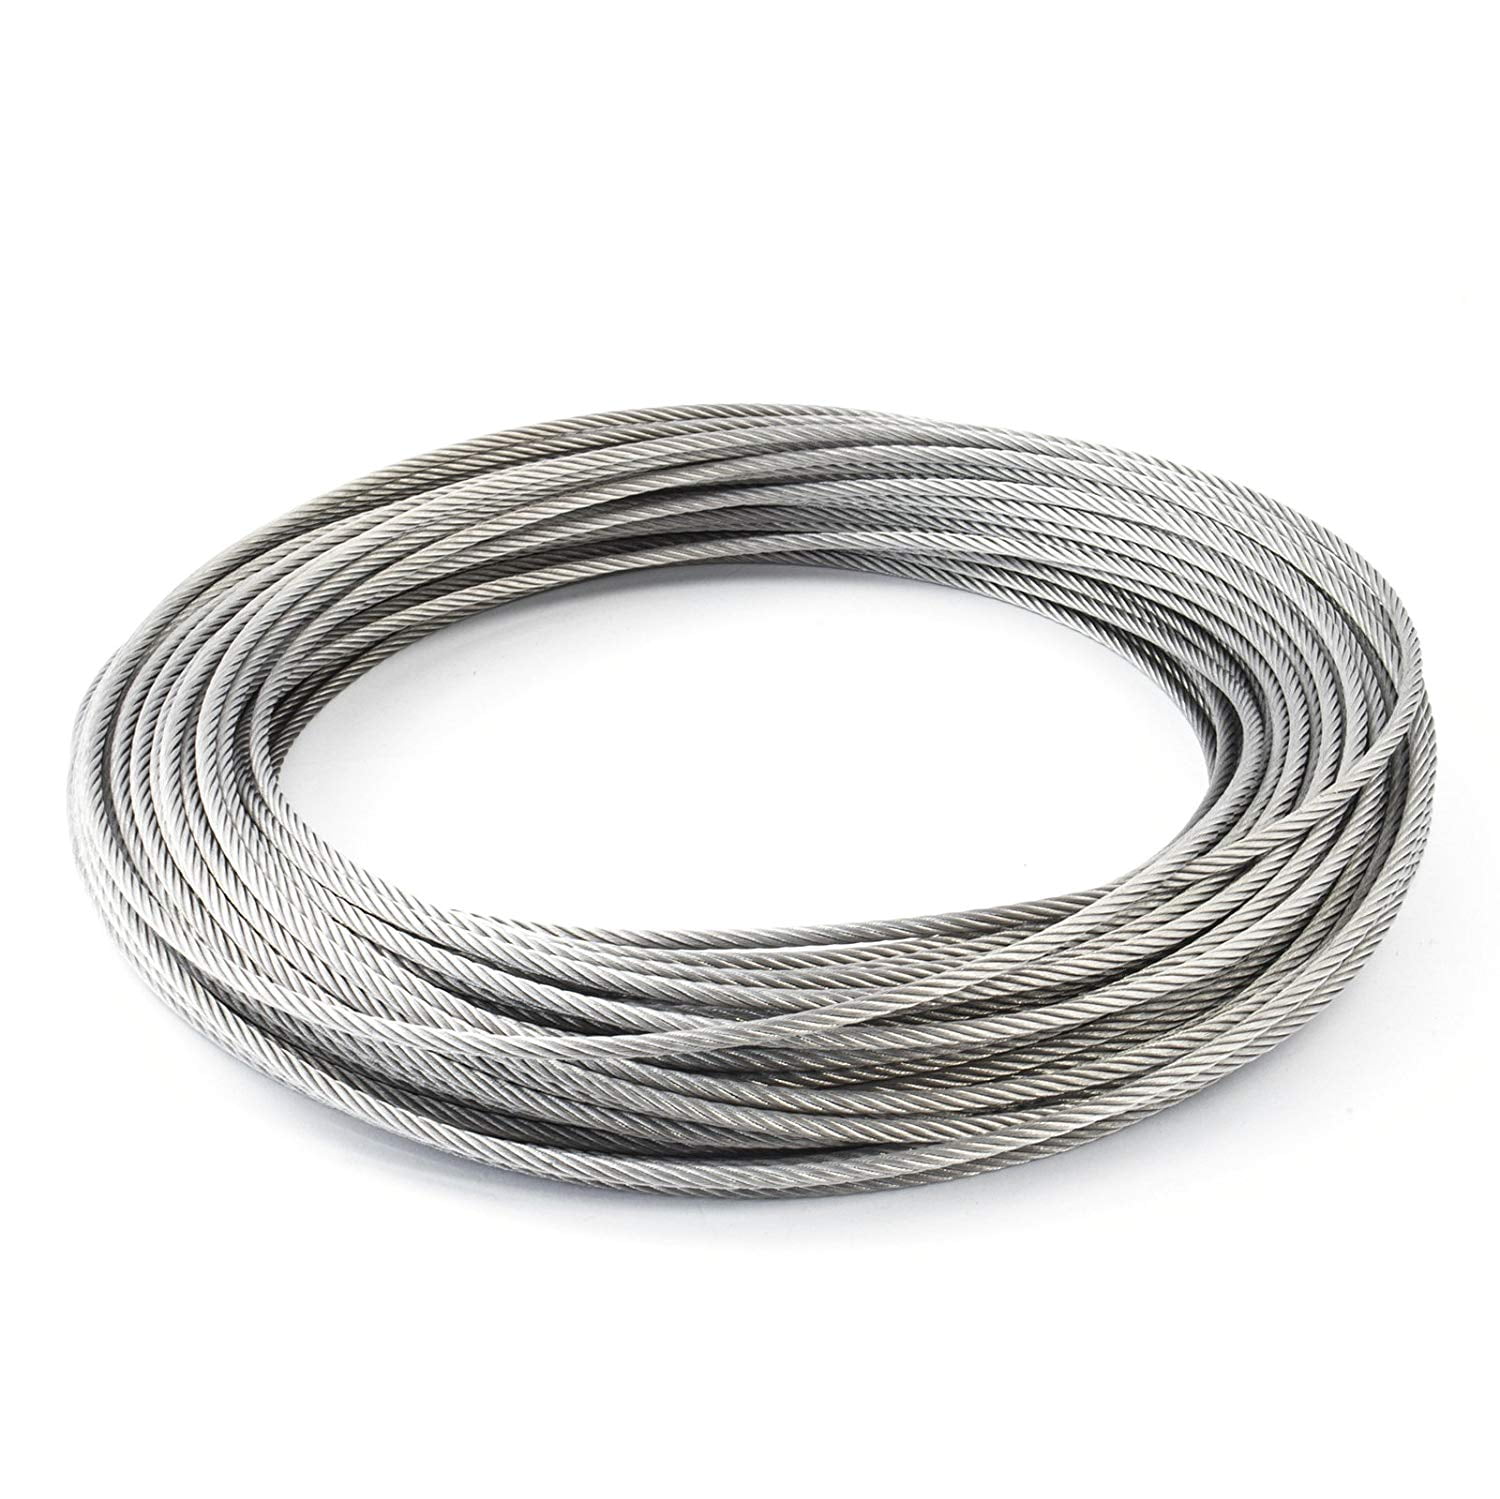 Laureola 1/8 7x19 Stainless Steel Aircraft Wire Rope 304 Grade 300ft